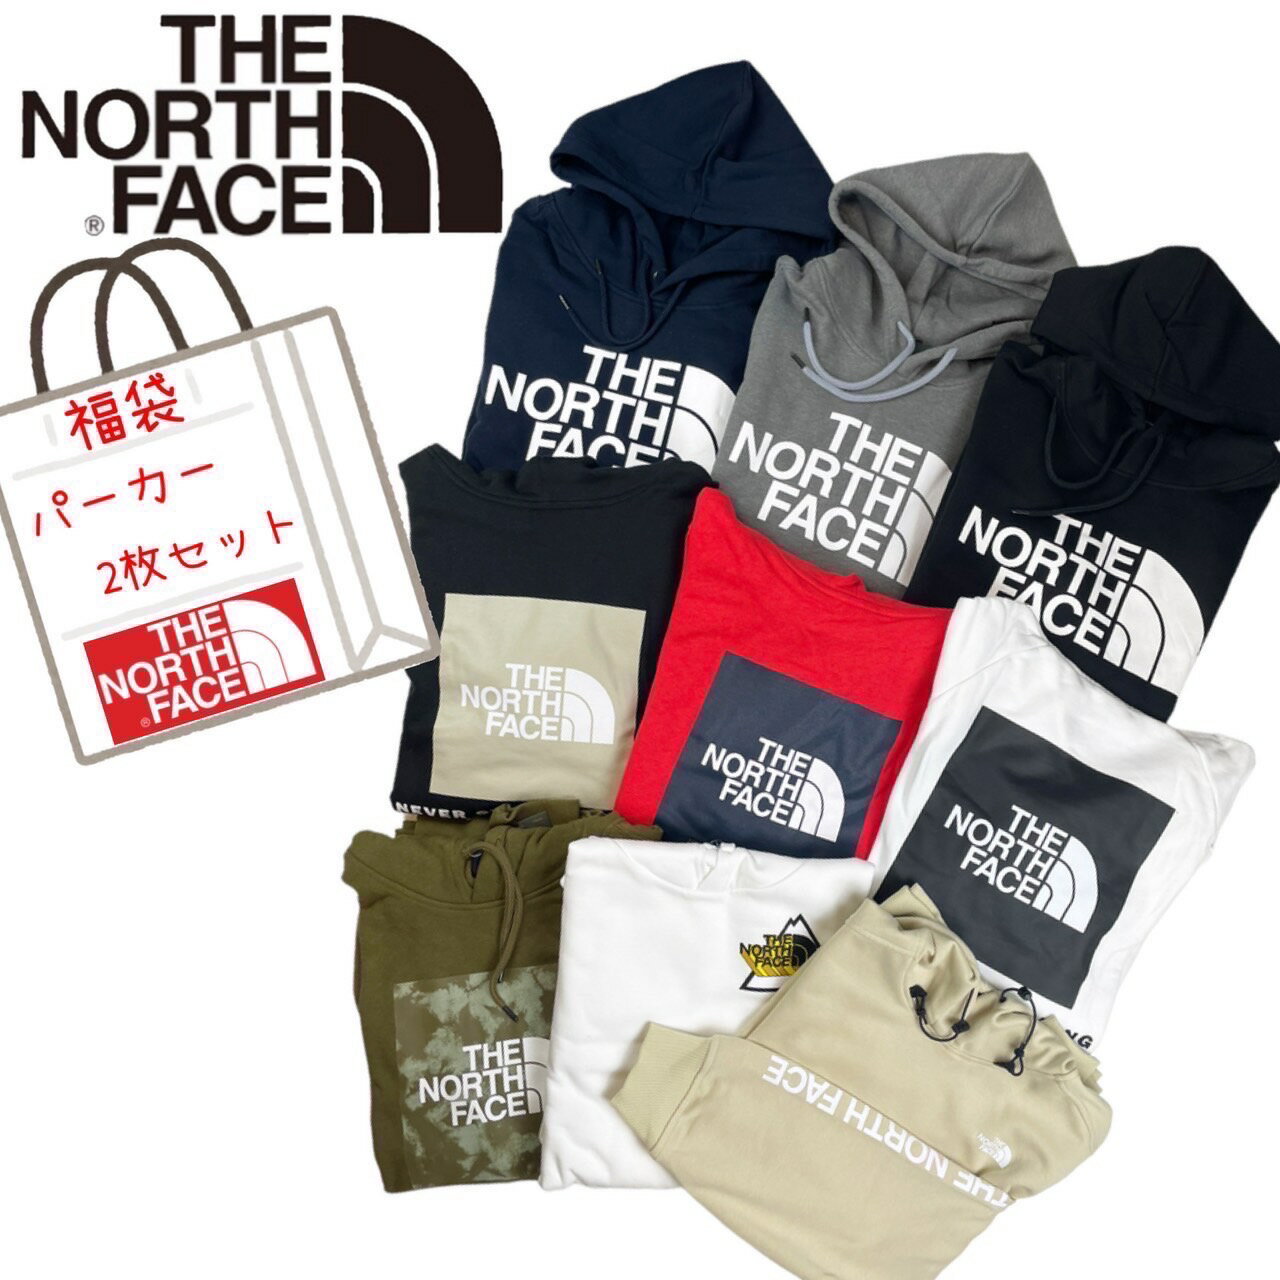 U m[XtFCX The North Face p[J[ 2Zbg  Y y 2  t[fB[ gbvX THE NORTH FACE